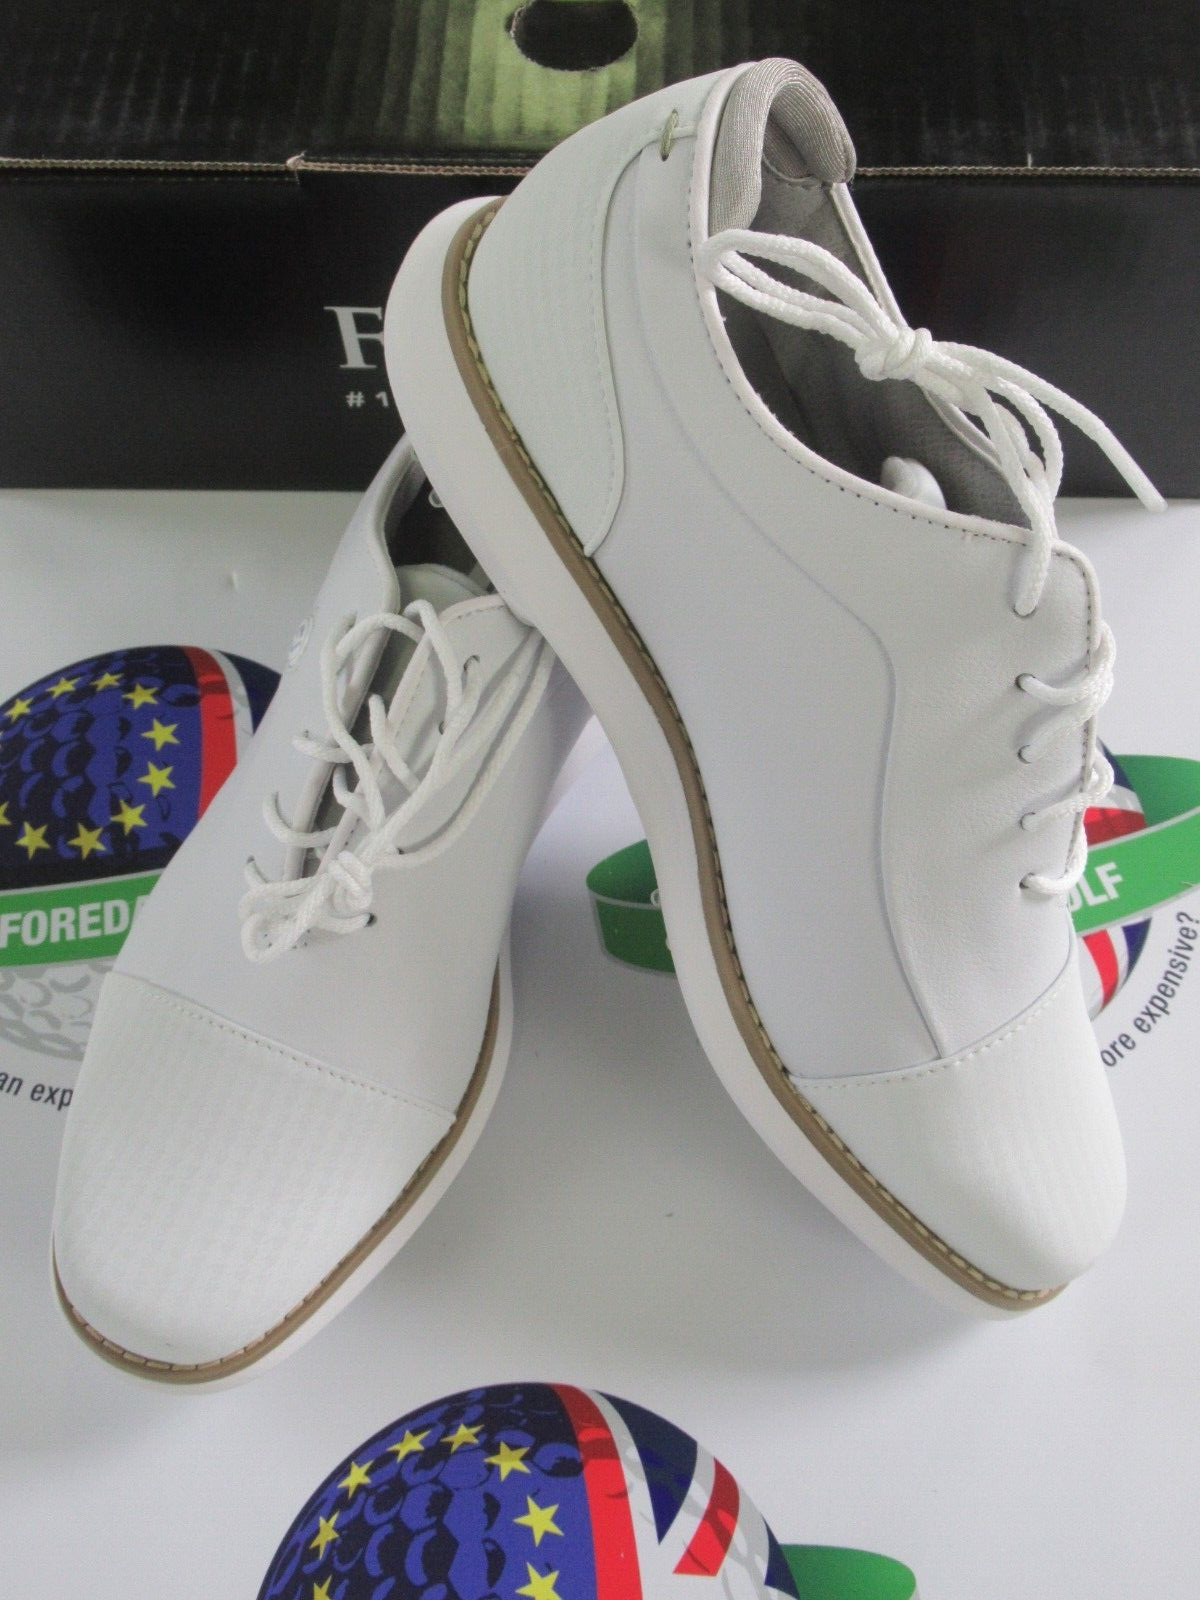 footjoy fj traditions womens golf shoes 97914k white uk size 5.5 wide/large